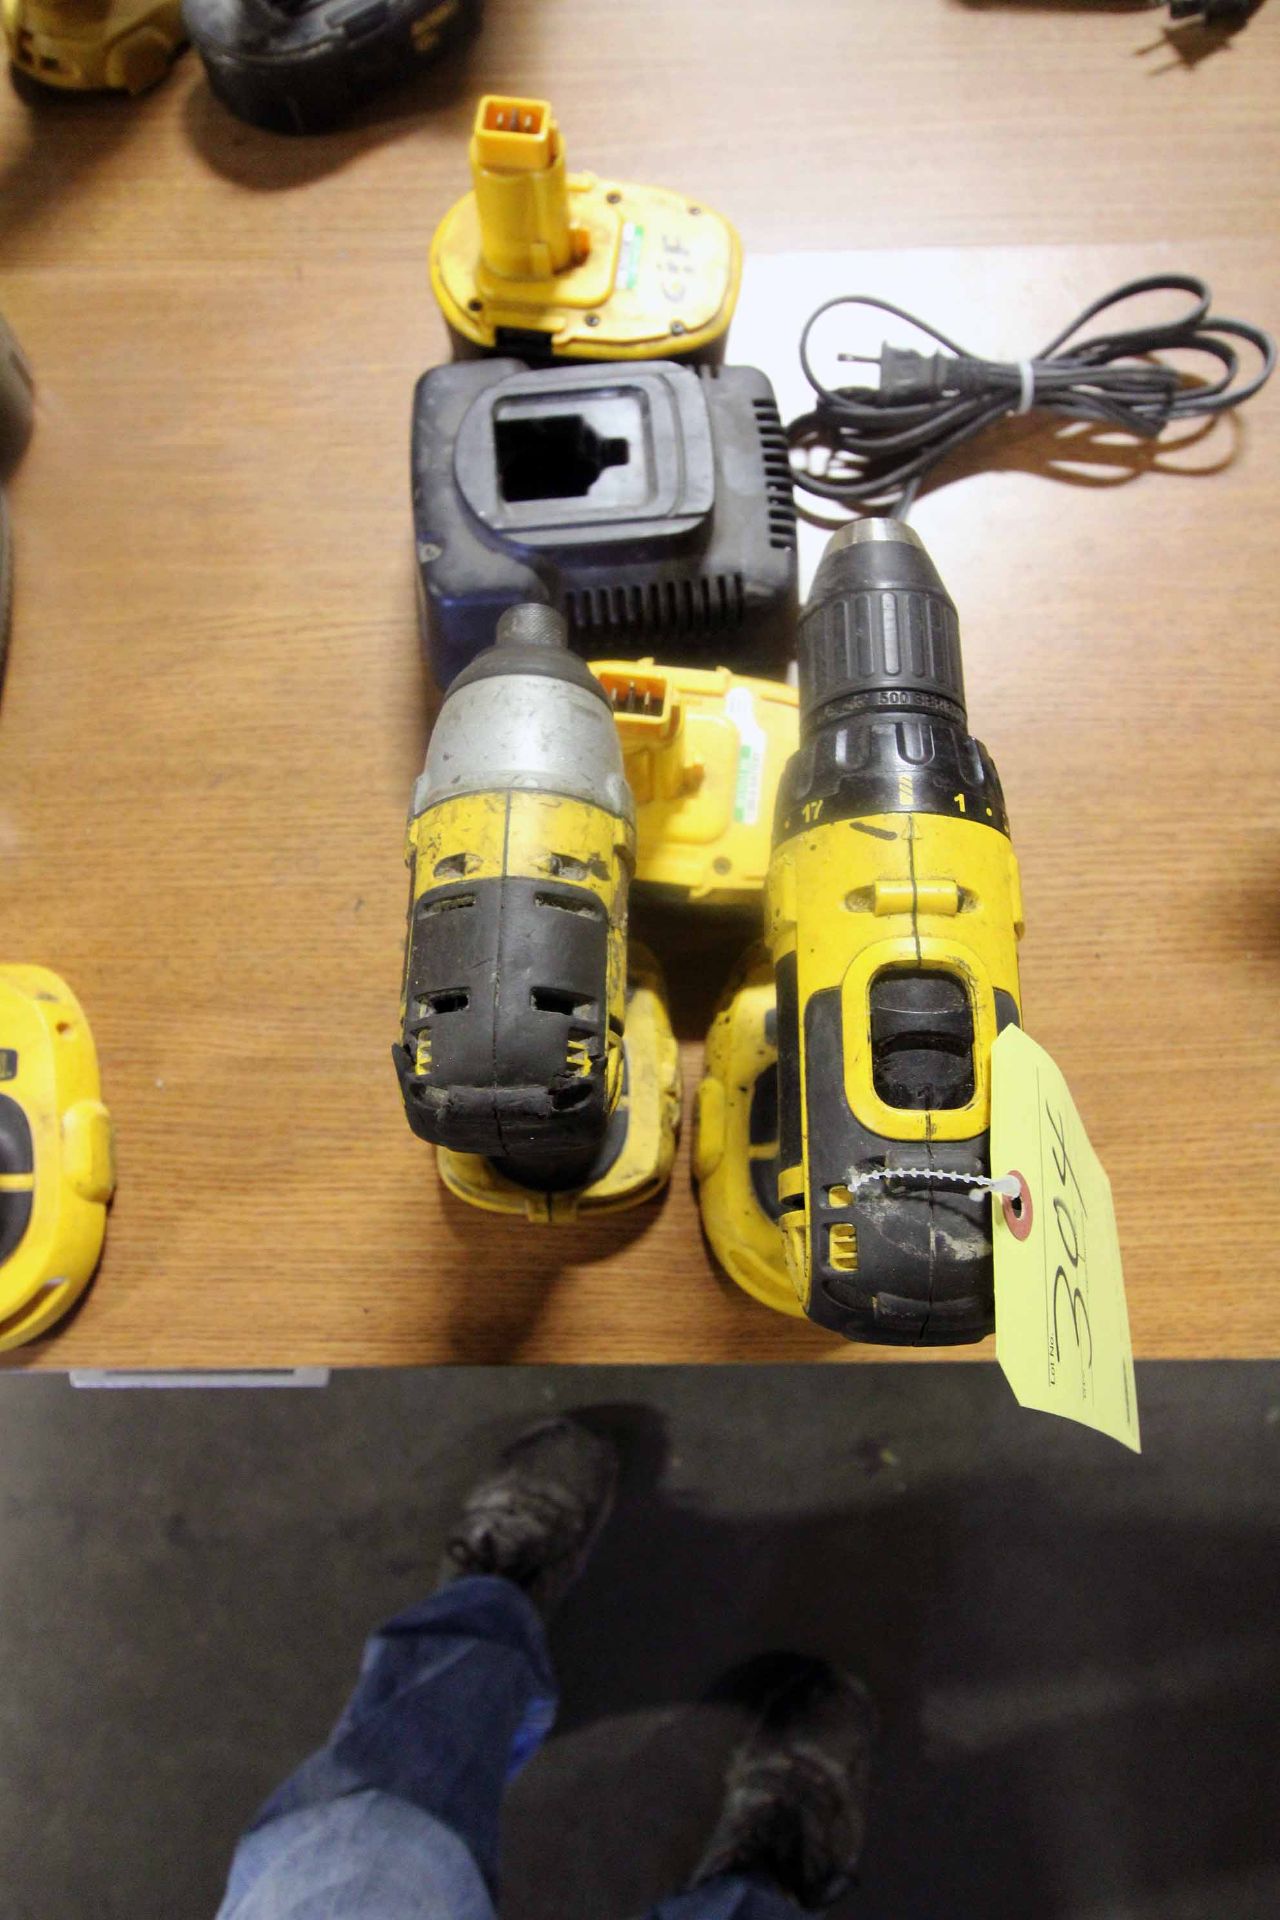 LOT OF DEWALT CORDLESS TOOLING: (1) right angle drill & (1) impact drill, both 18 v., battery